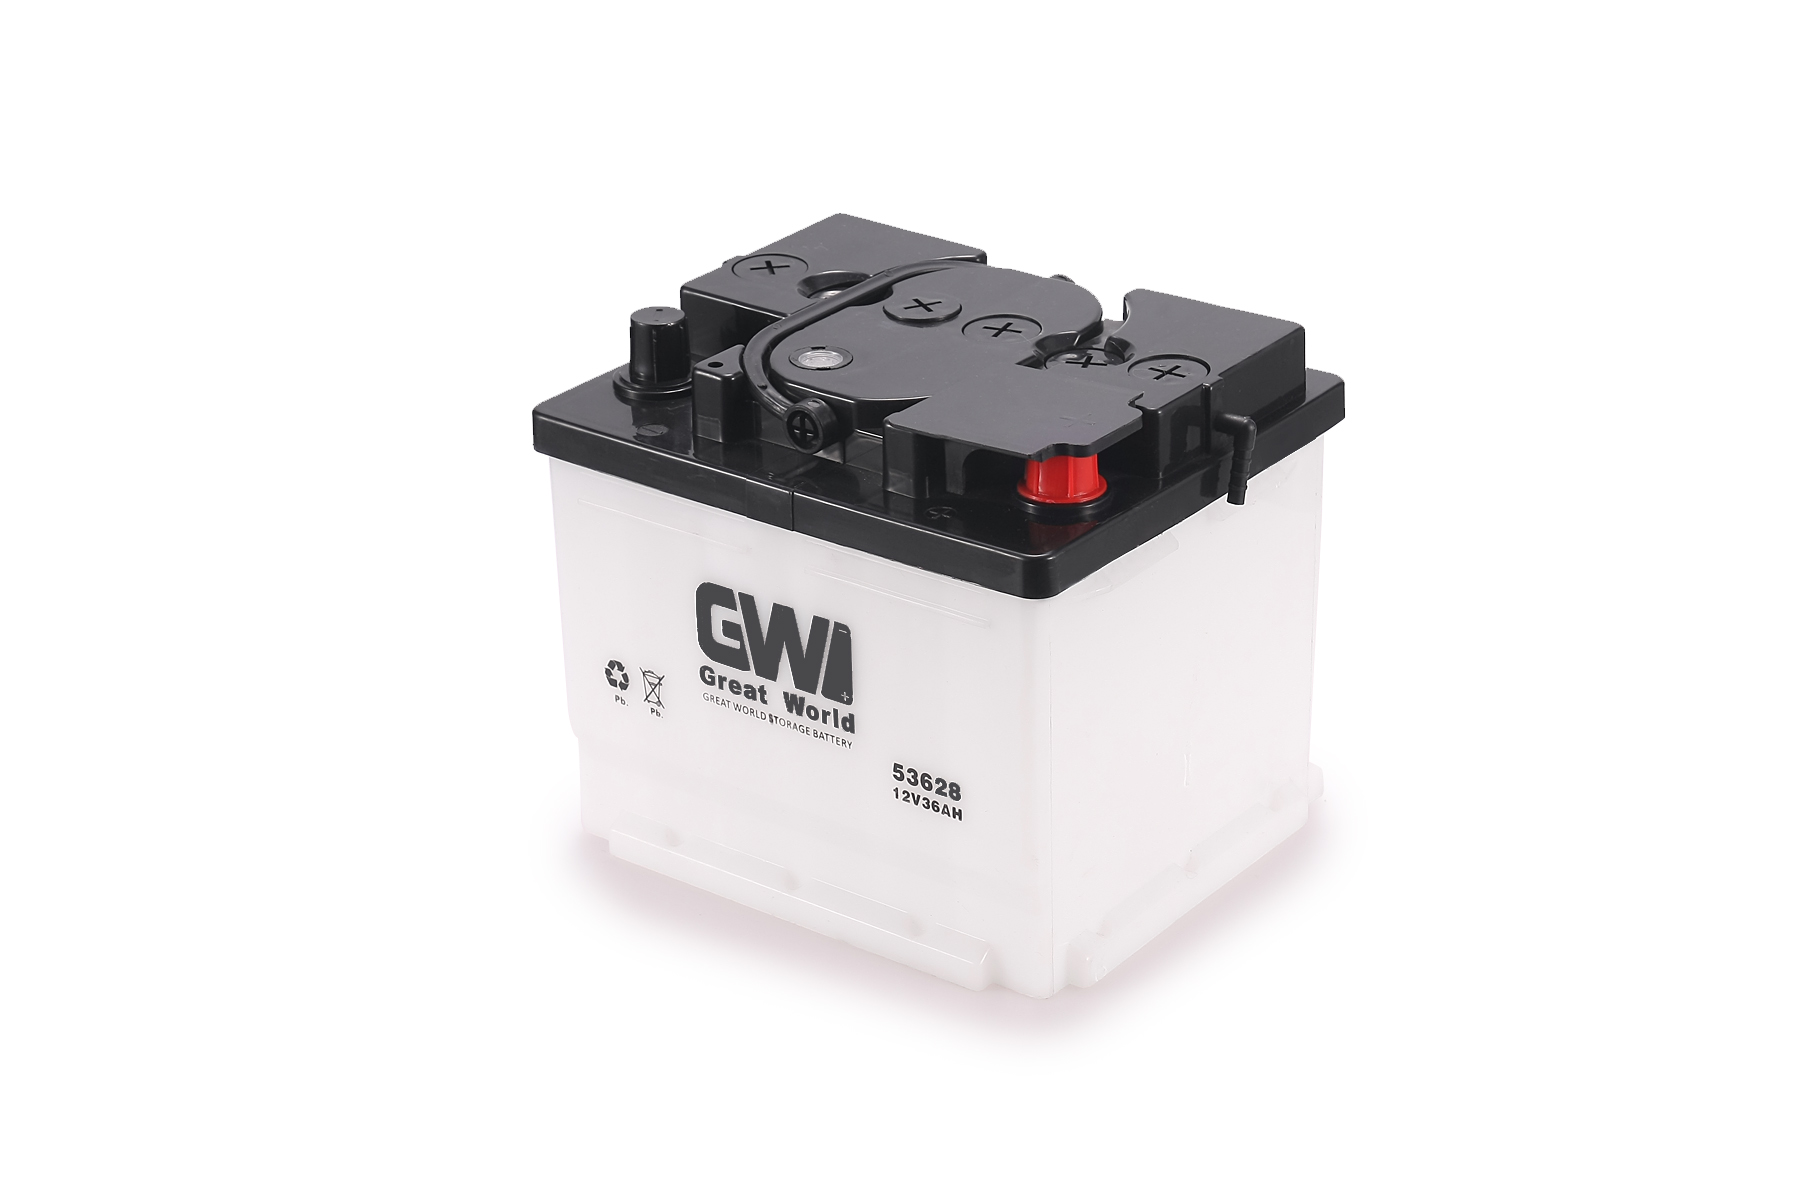 GW Brand 12V 36ah Car Dry Charged Battery DIN36 Lead-acid Auto Battery